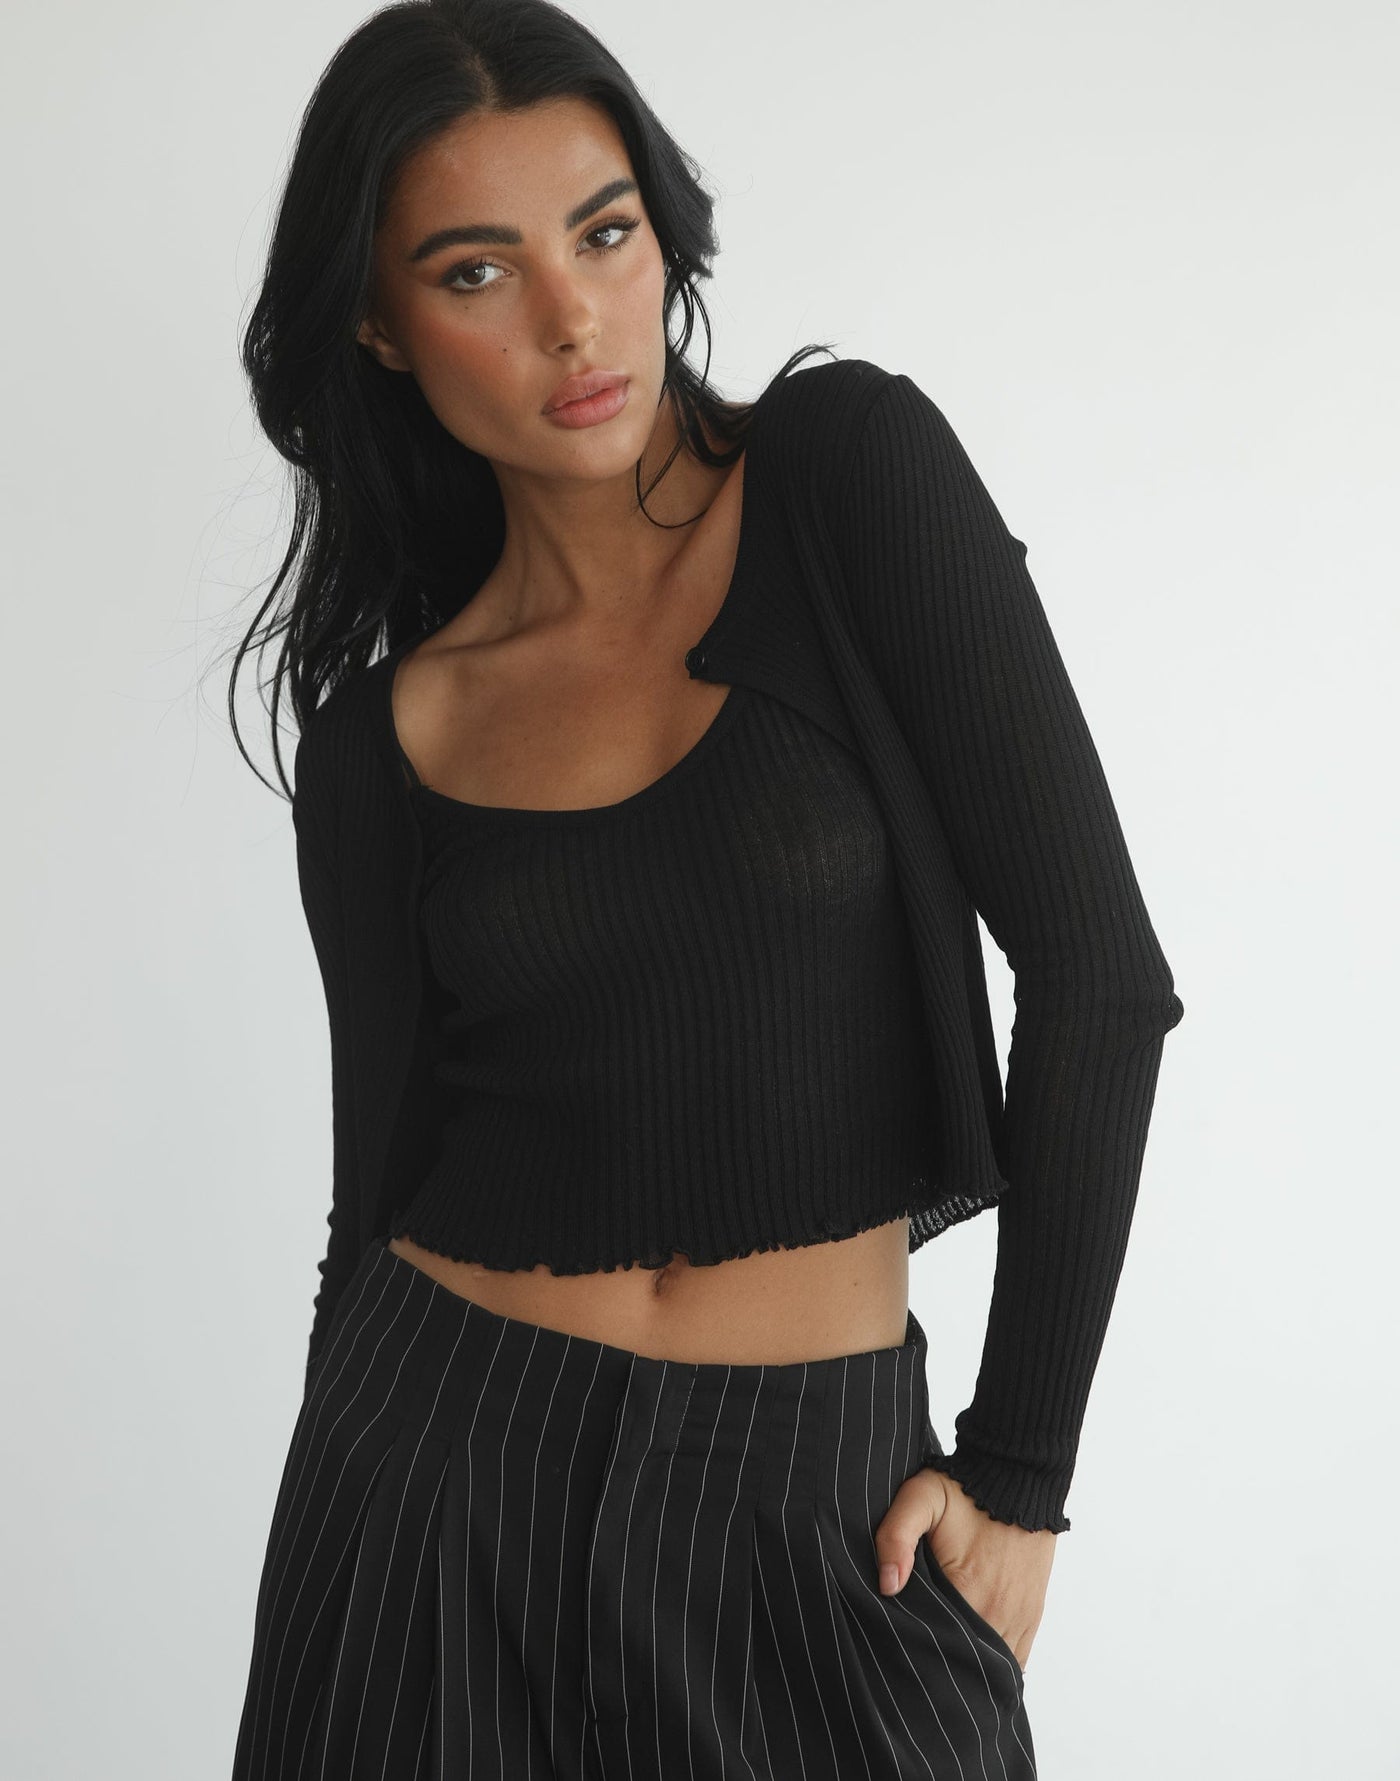 Kodie Two Piece Top (Black) - Black Cami and Cardigan Top - Women's Top - Charcoal Clothing